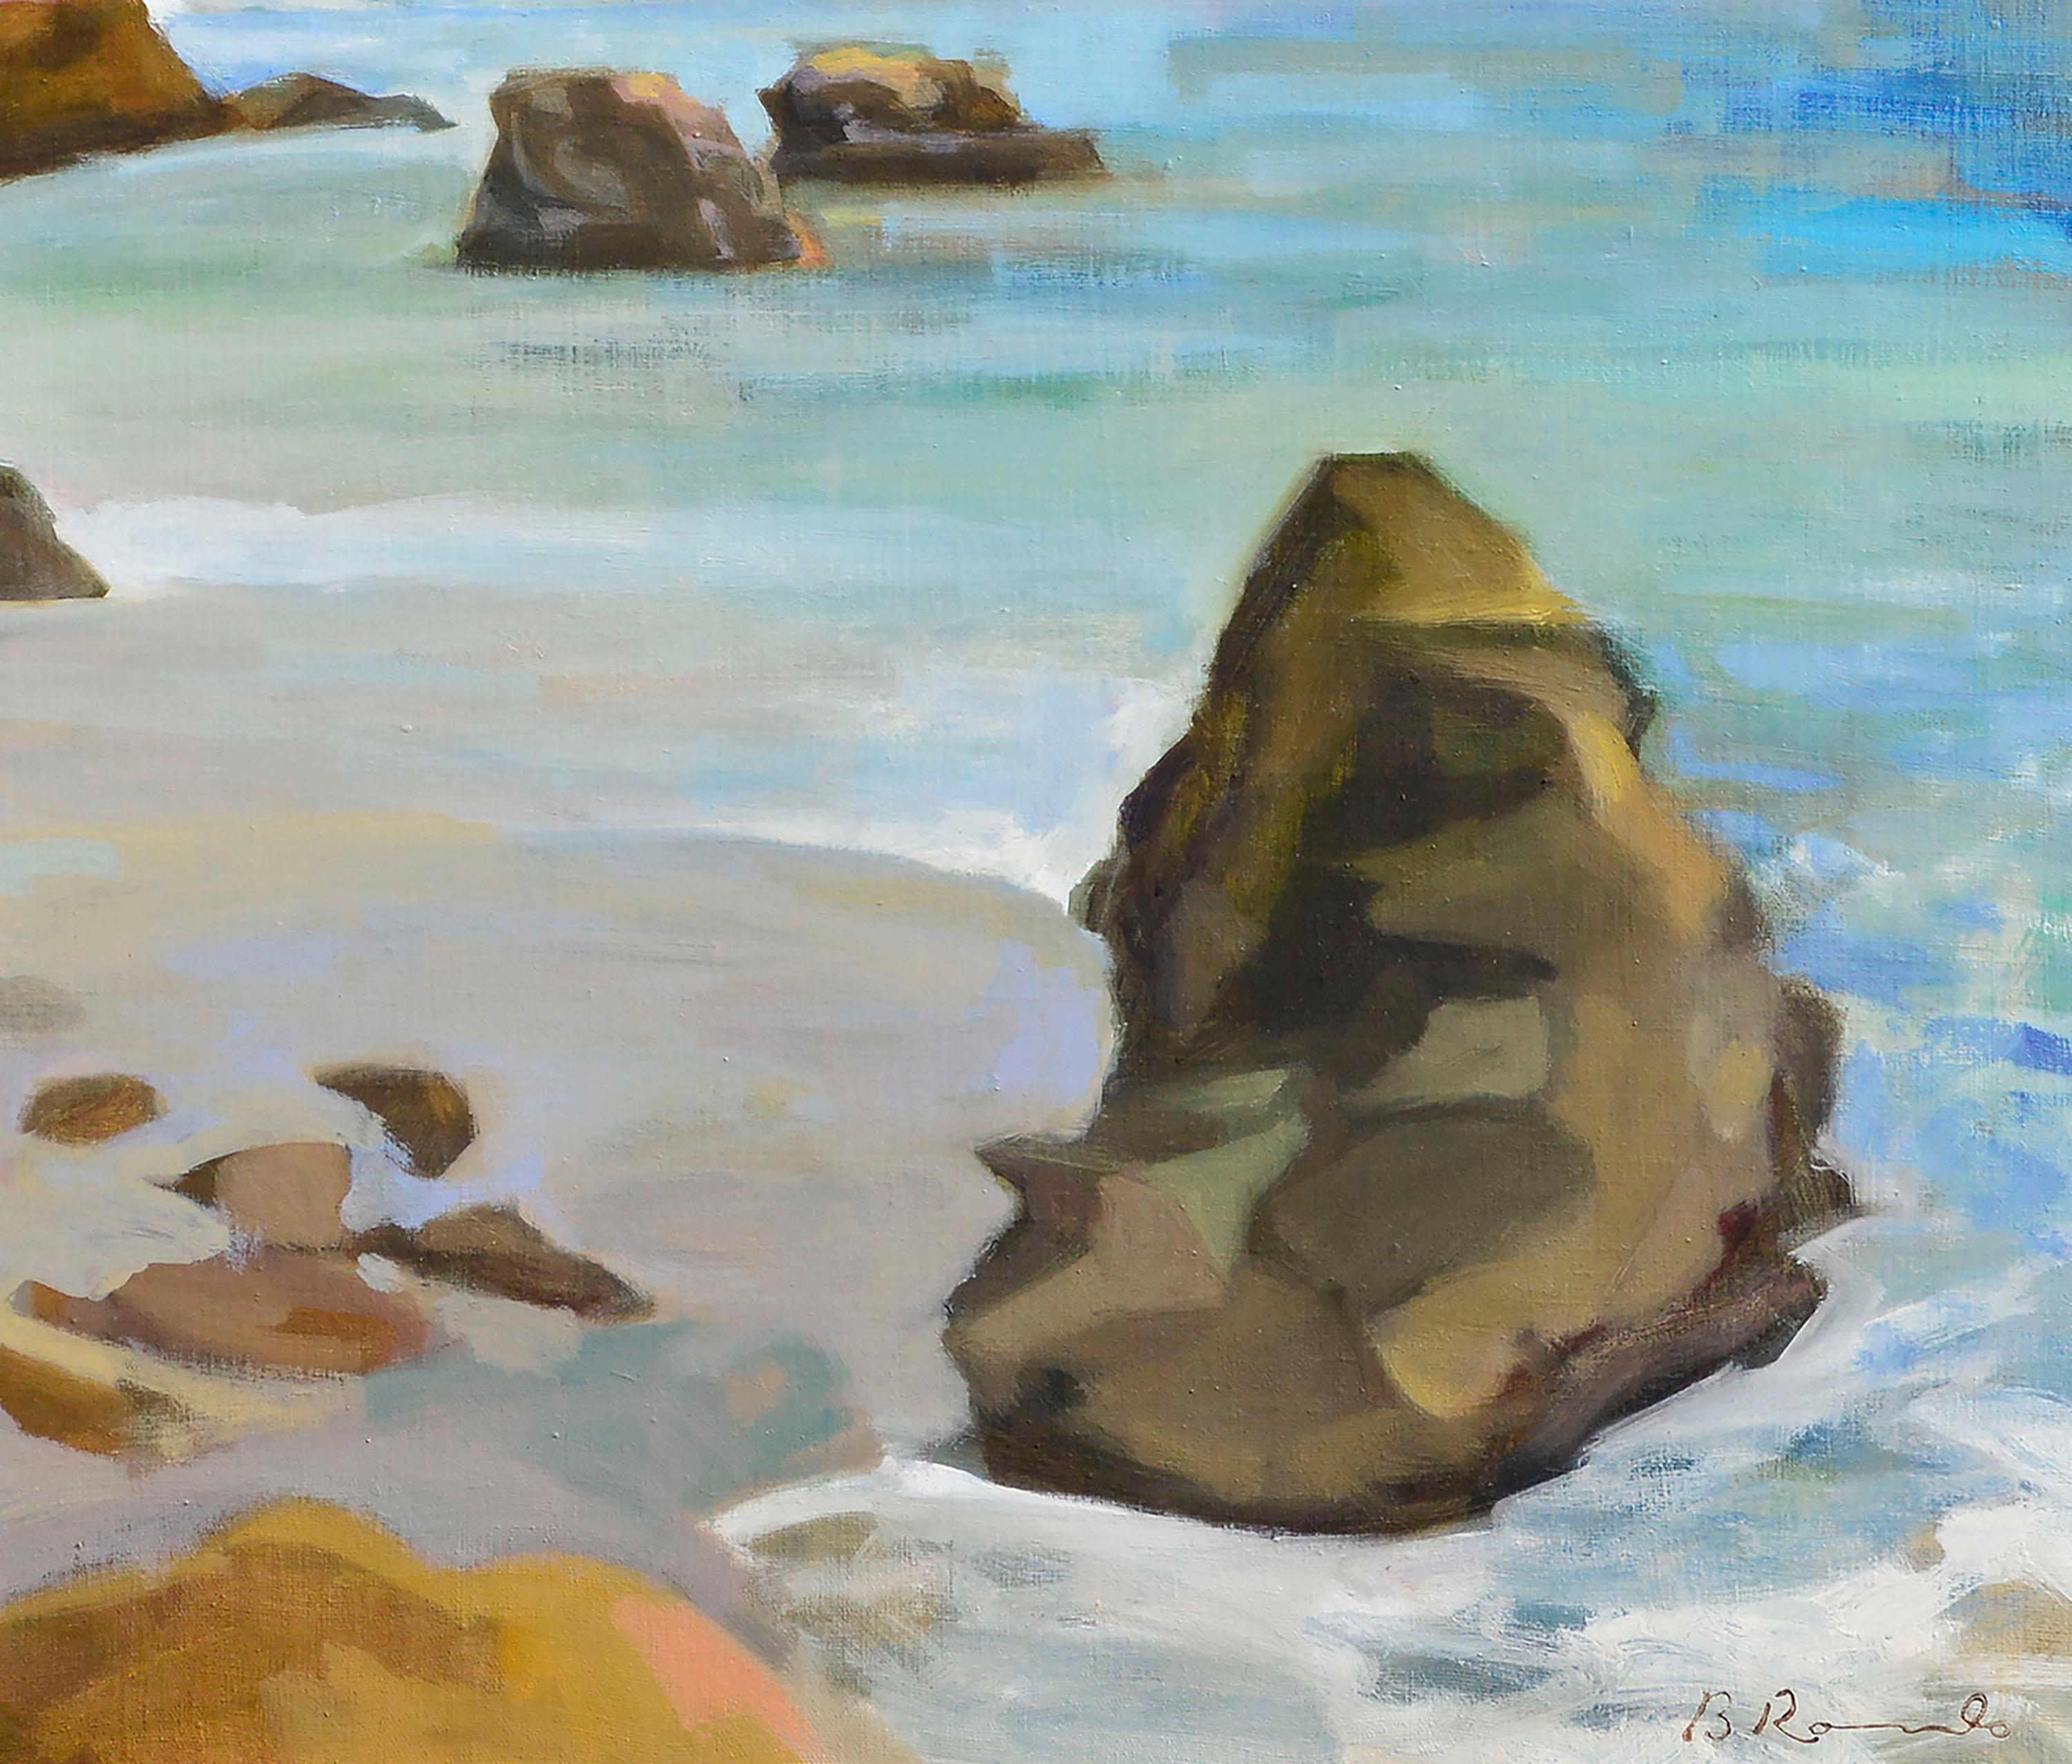 Plein air landscape in oil of rocks along the California coast at West Cliff Drive in beautiful Santa Cruz, California, by Brian Rounds (American, b. 1968). Signed 